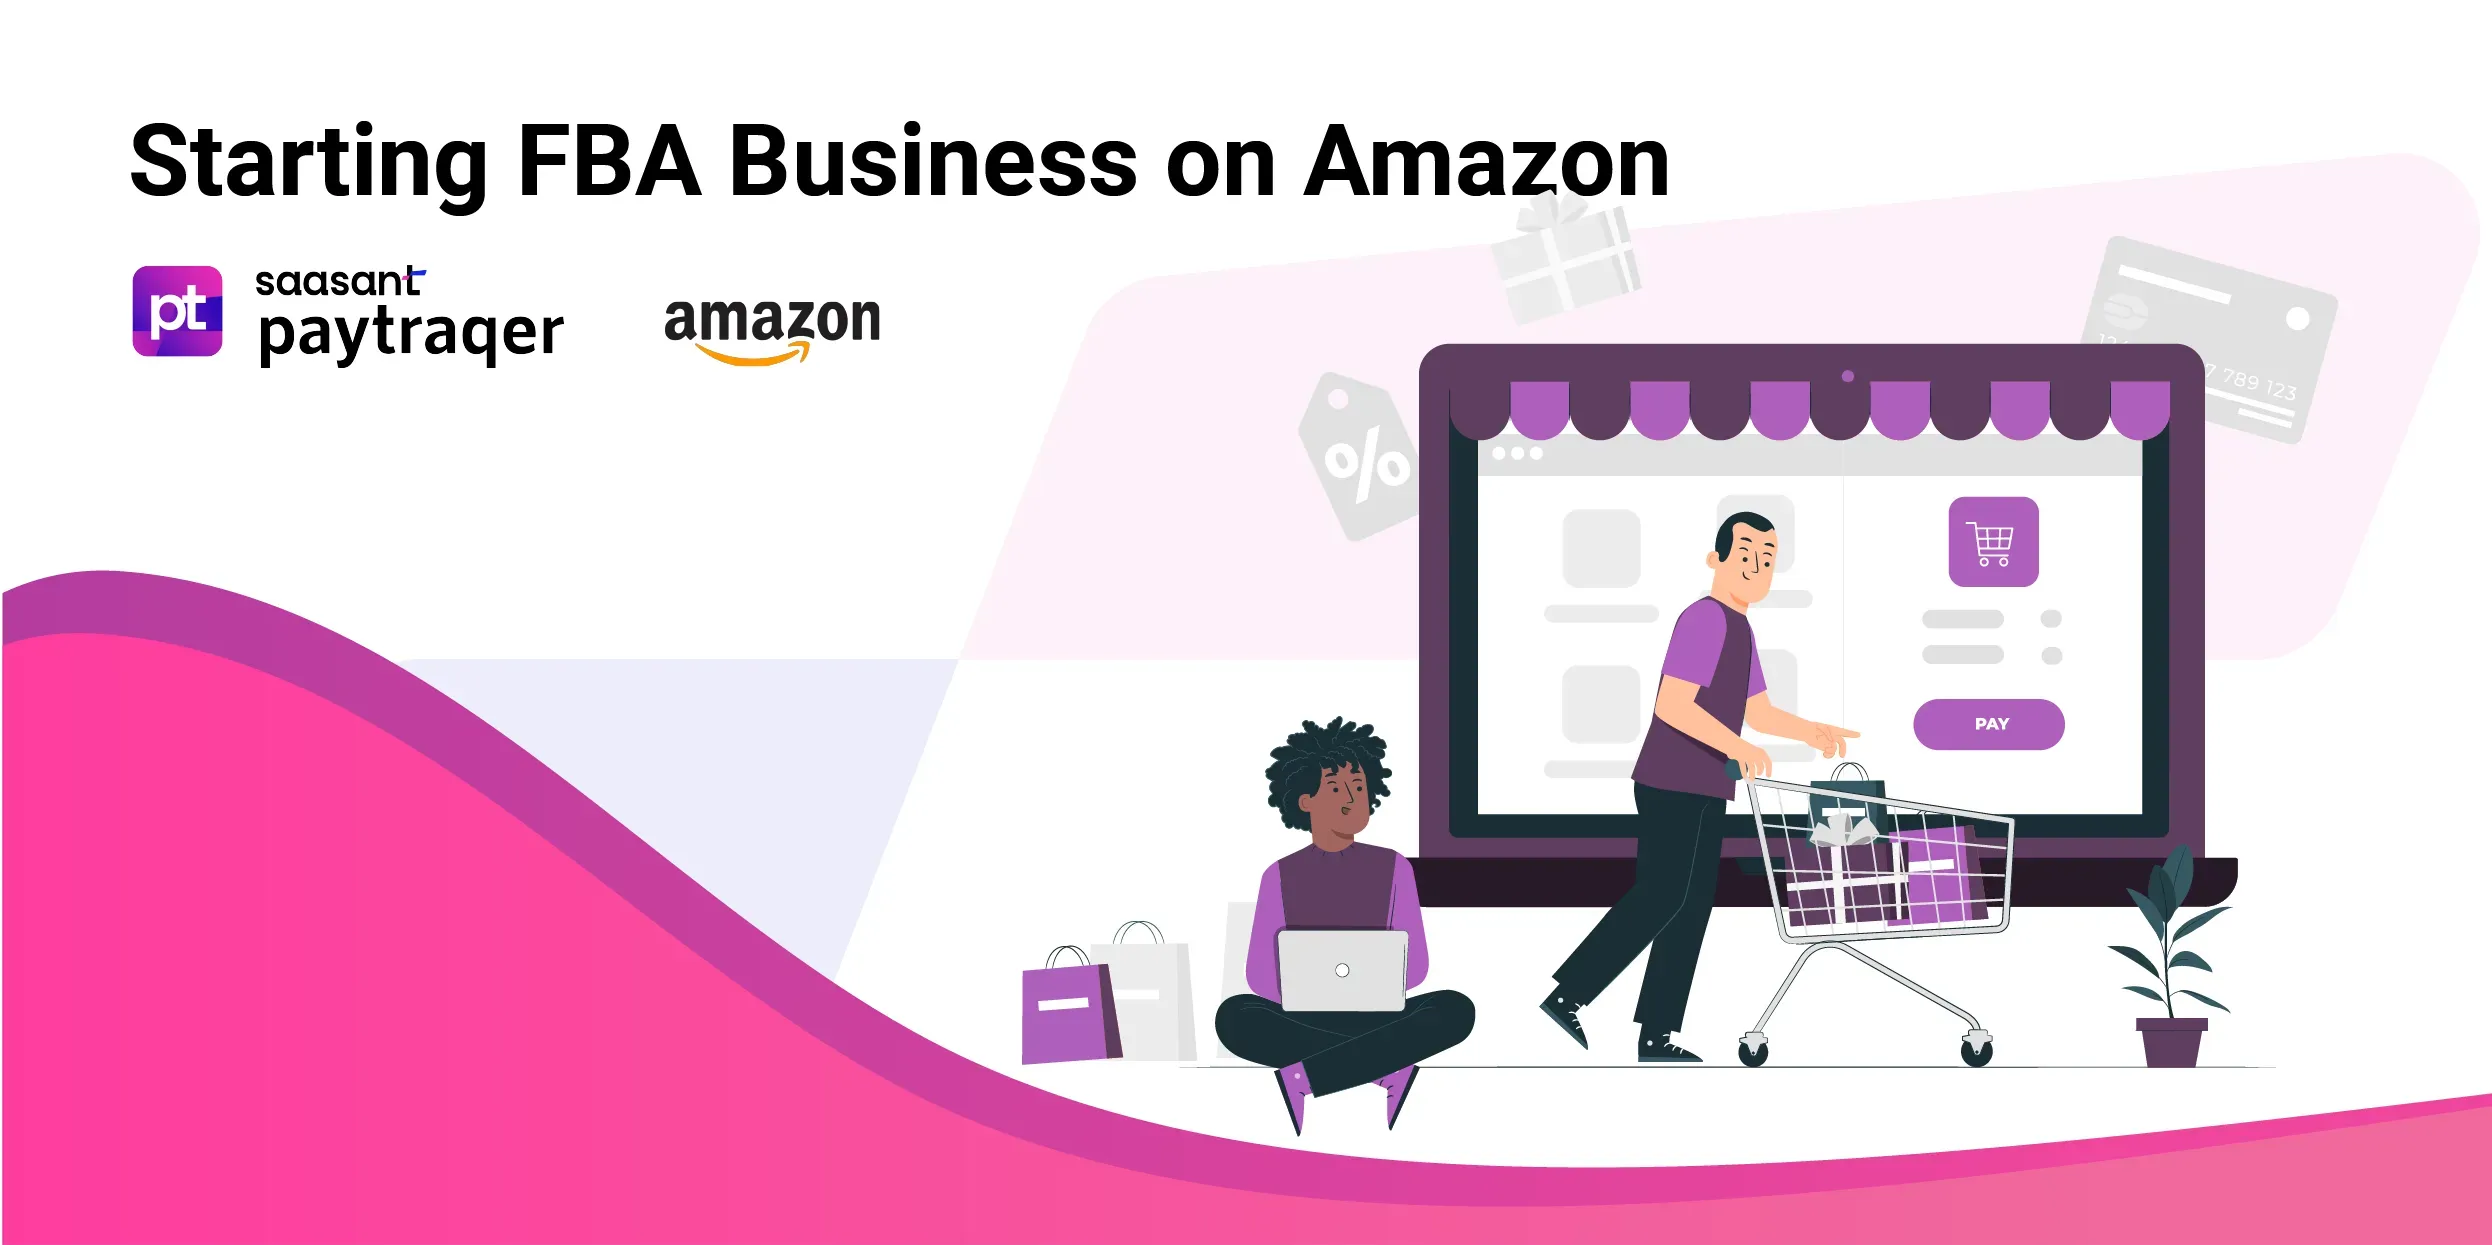 How to Start an Amazon FBA Business?